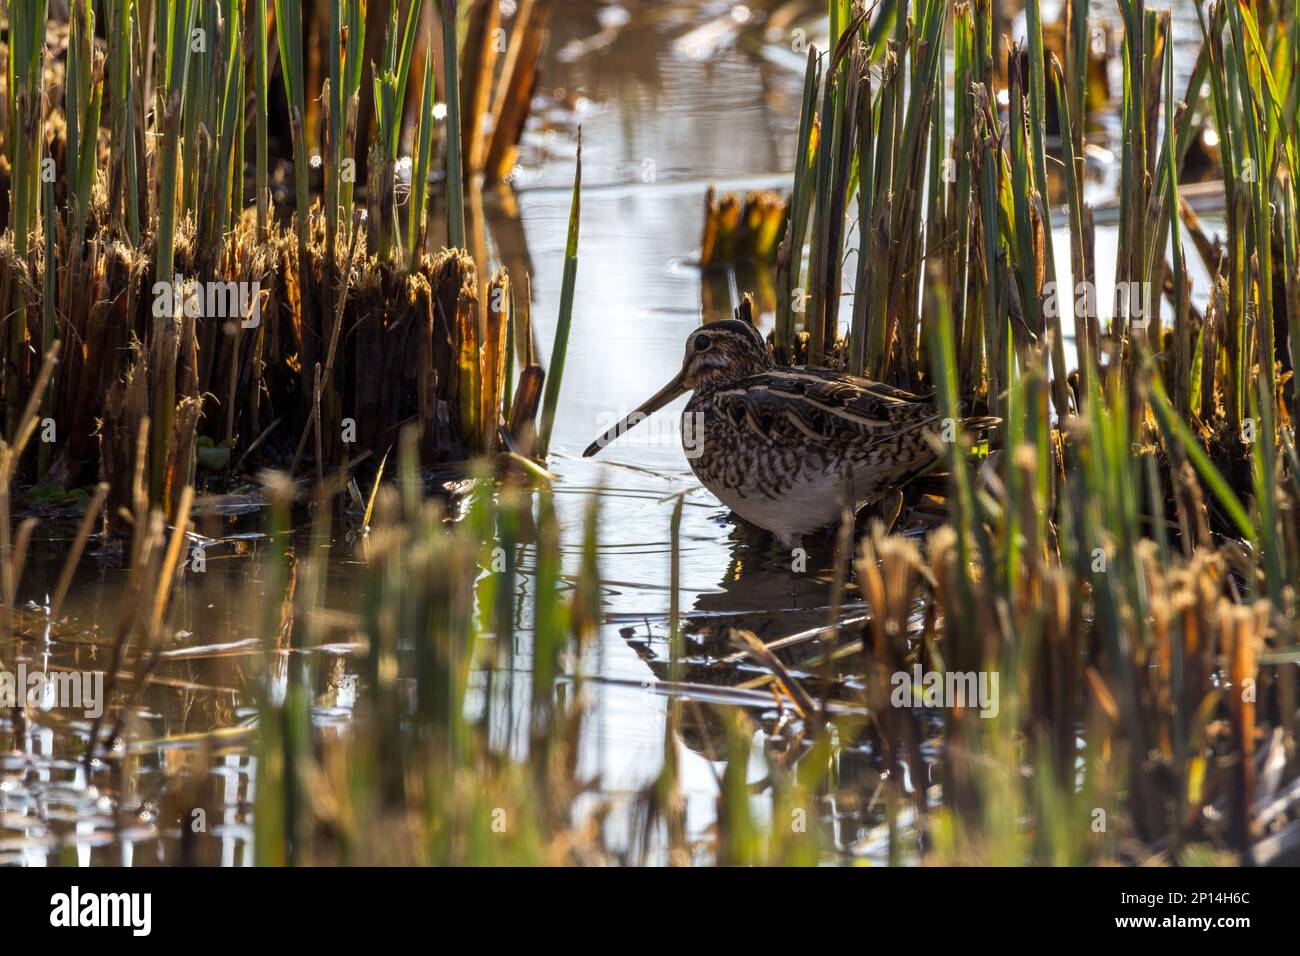 Snipe Gallinago x2, in cut reeds long strait bill dumpy body short legs eyes high on head buffish brown streaky plumage with black and white markings Stock Photo